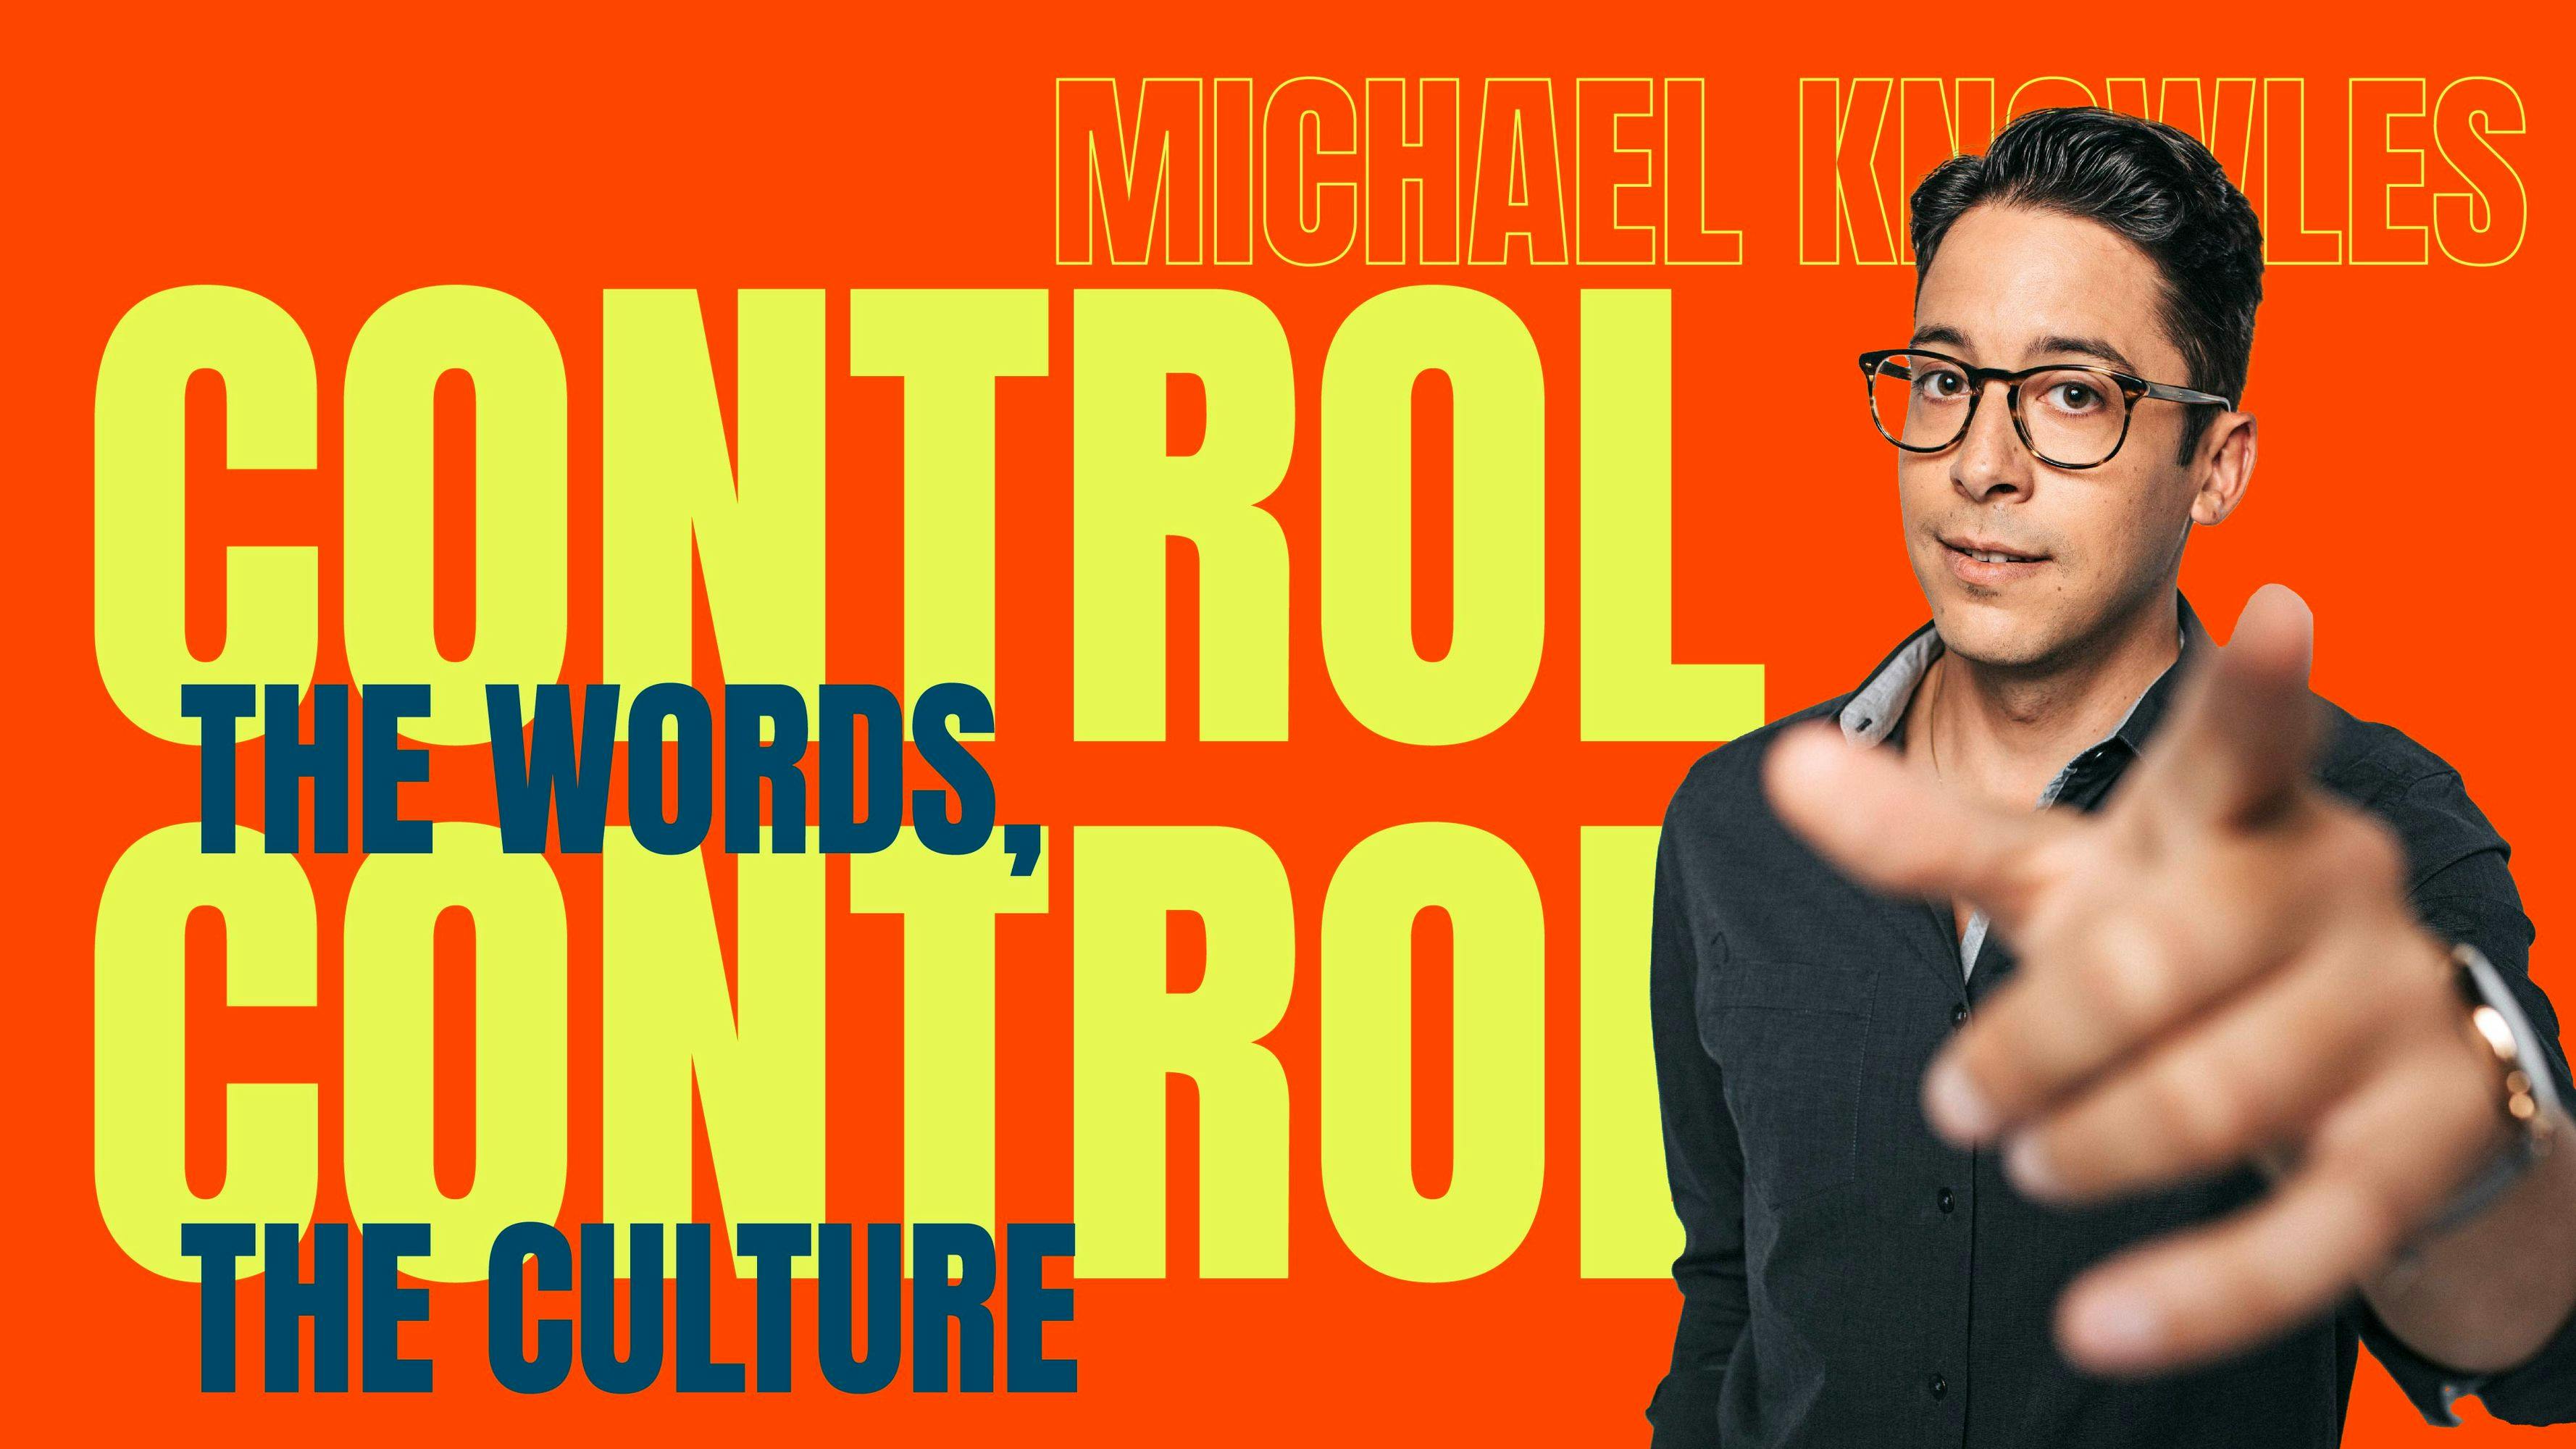 Control the Words, Control the Culture